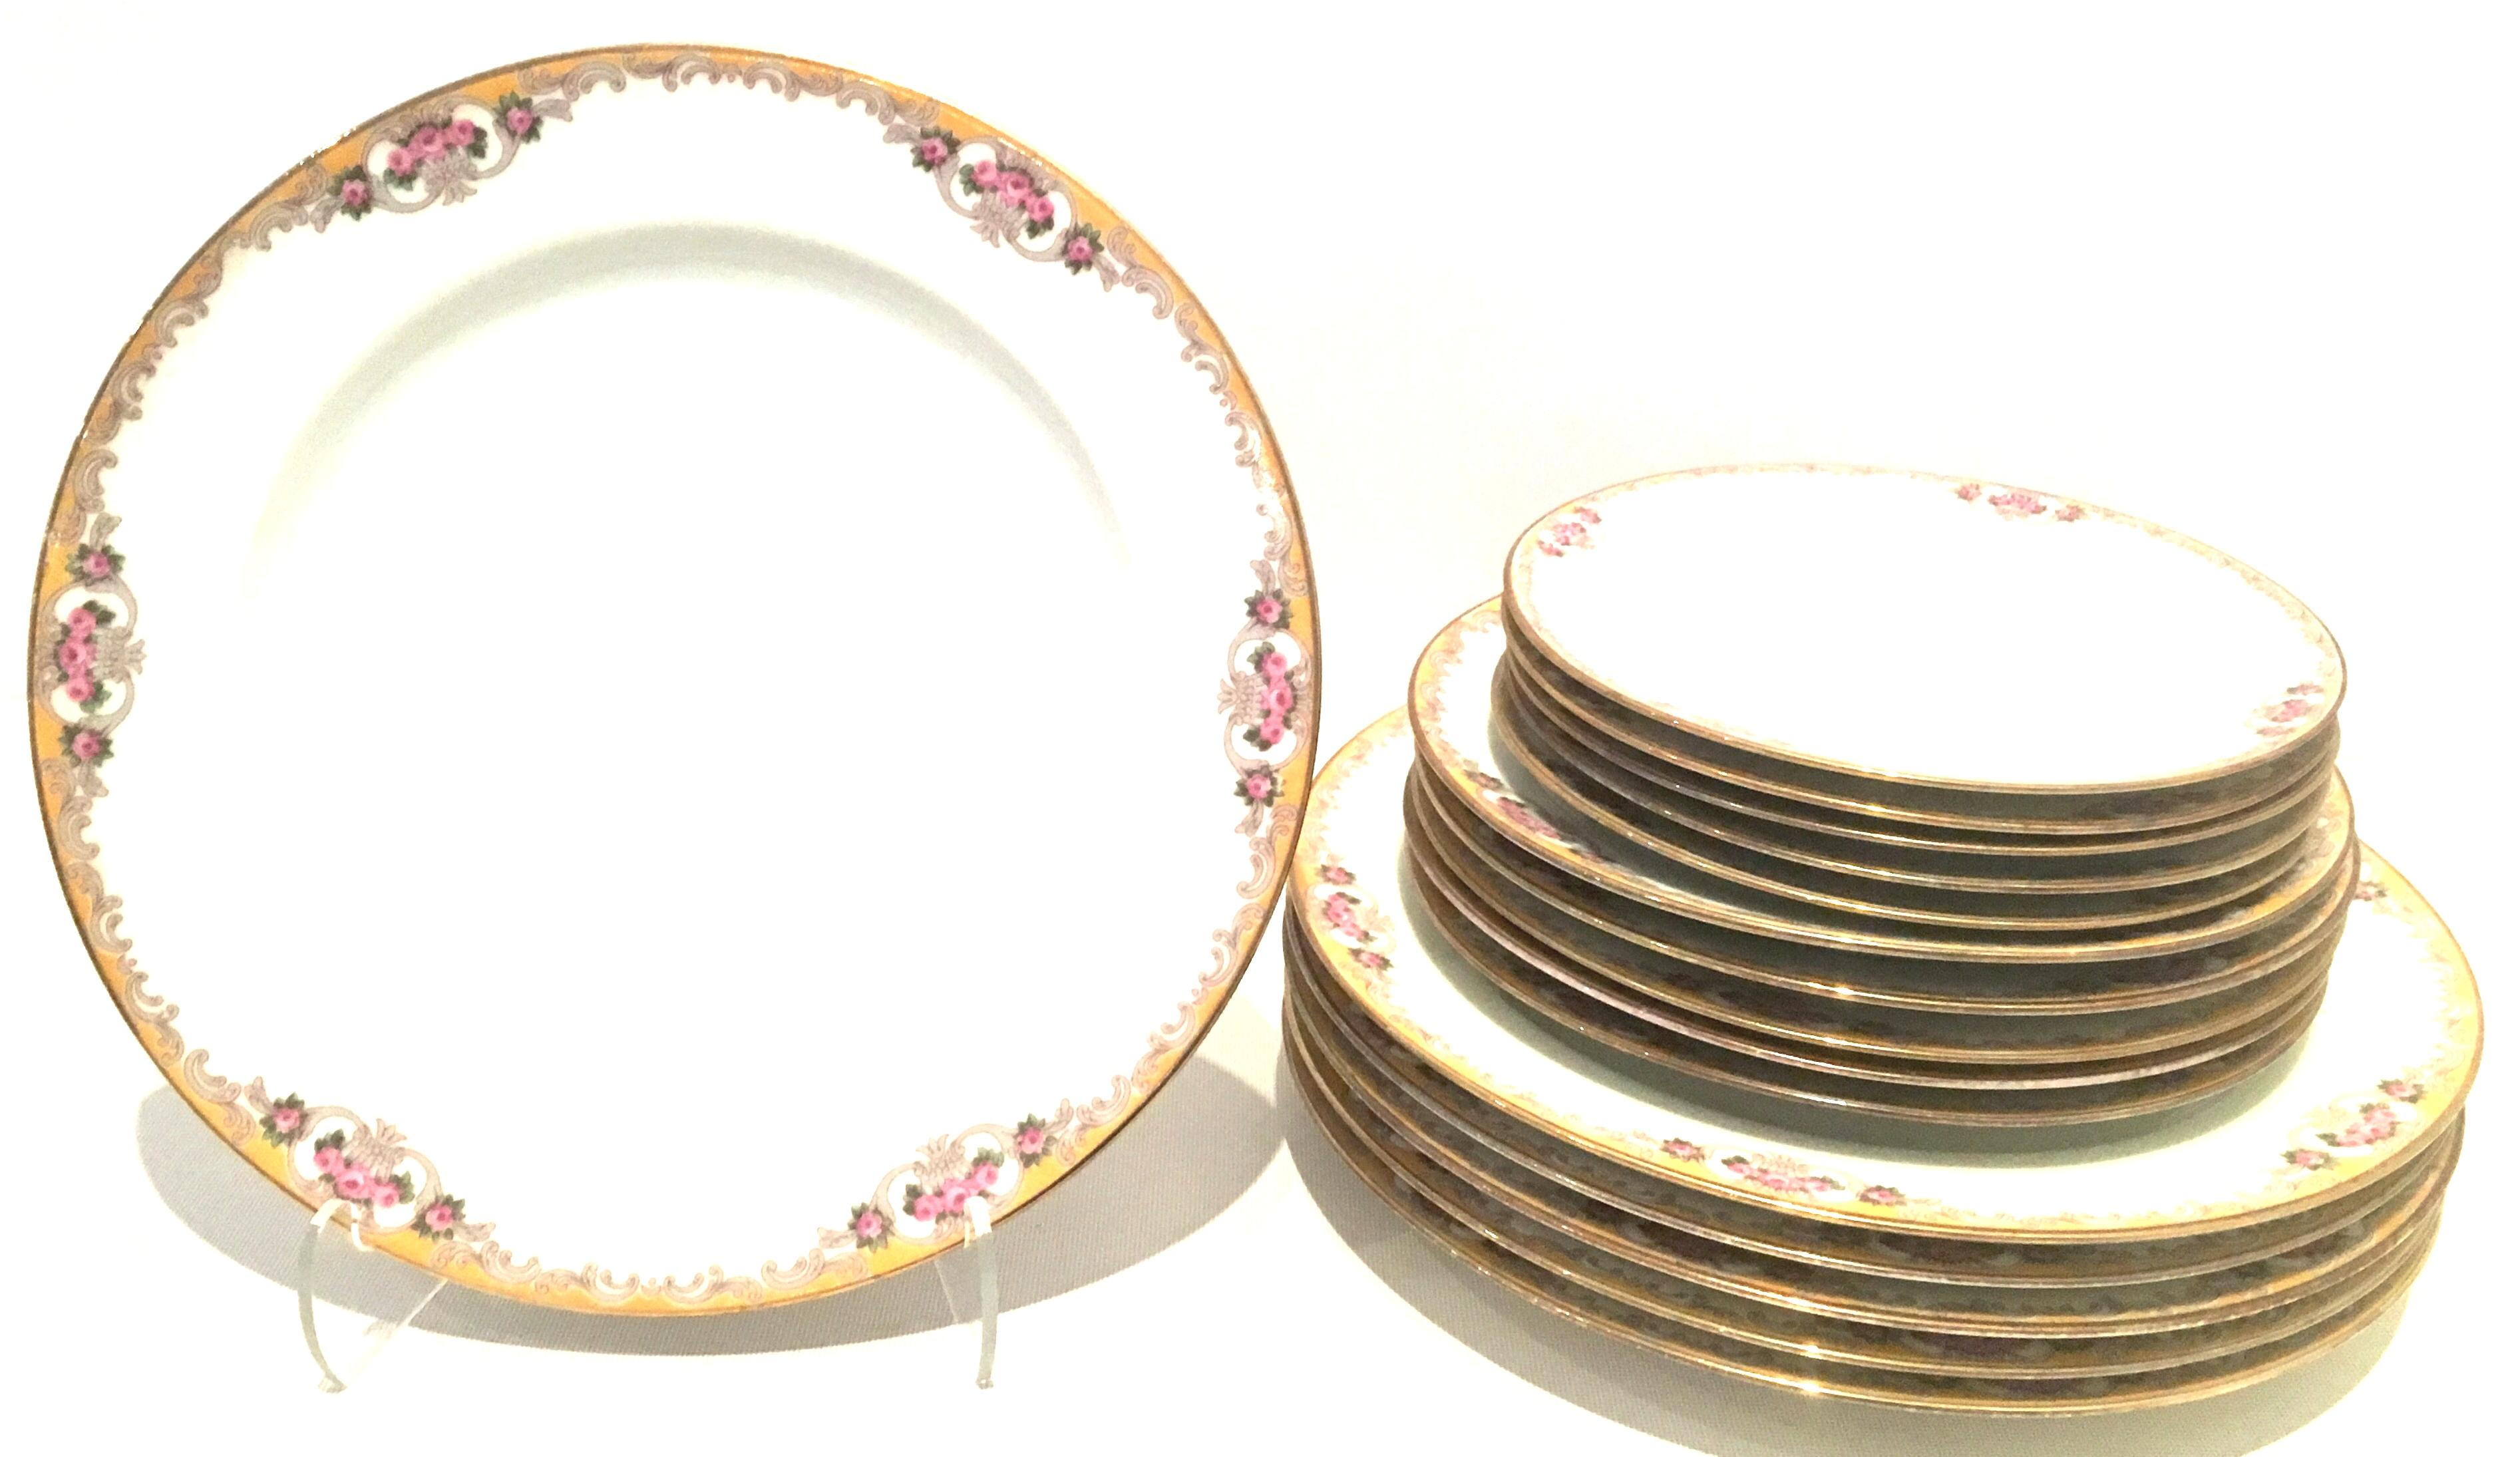 Mid-20th century Art Nouveau limoges France hand painted porcelain and 22-karat gold
Set of seventeen pieces dinnerware set by. M. Redon. This timeless, Classic and coveted pattern features a bright white ground with yellow, pink and green floral